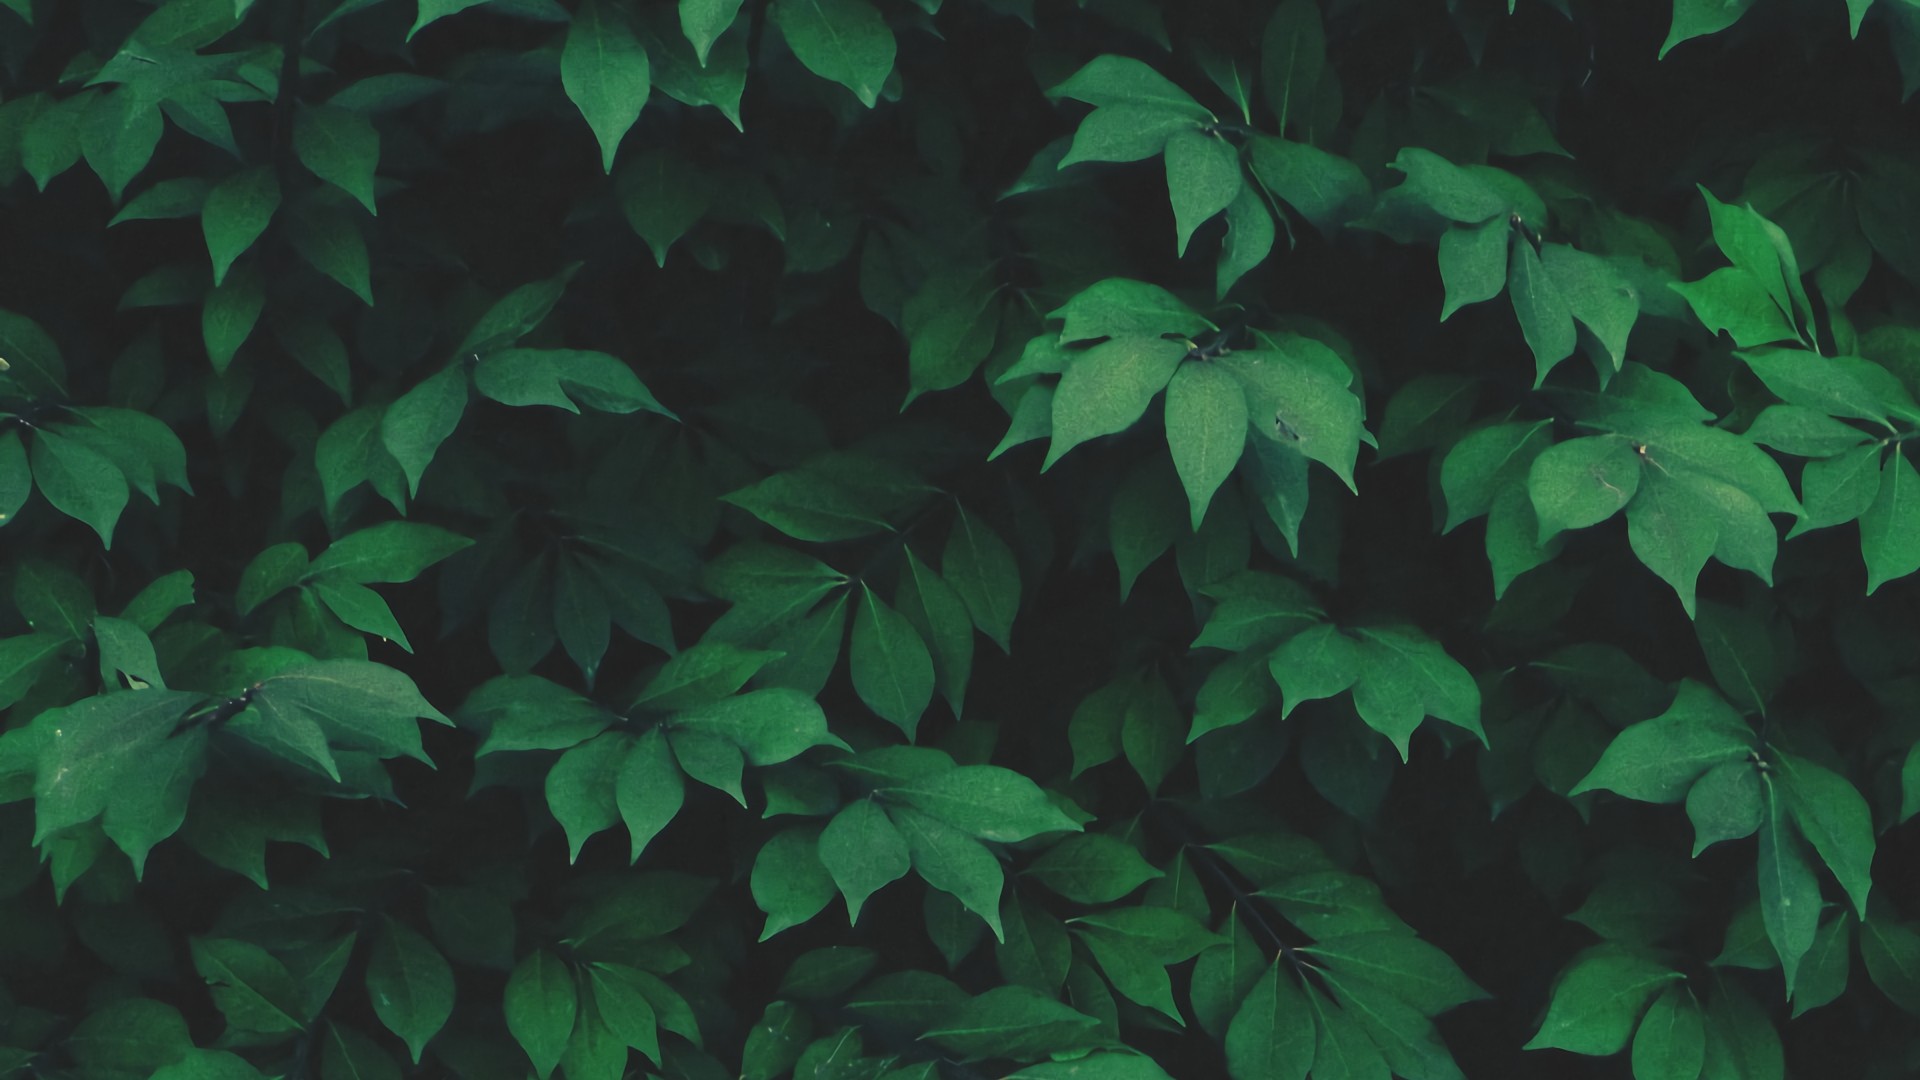 General 1920x1080 nature plants leaves